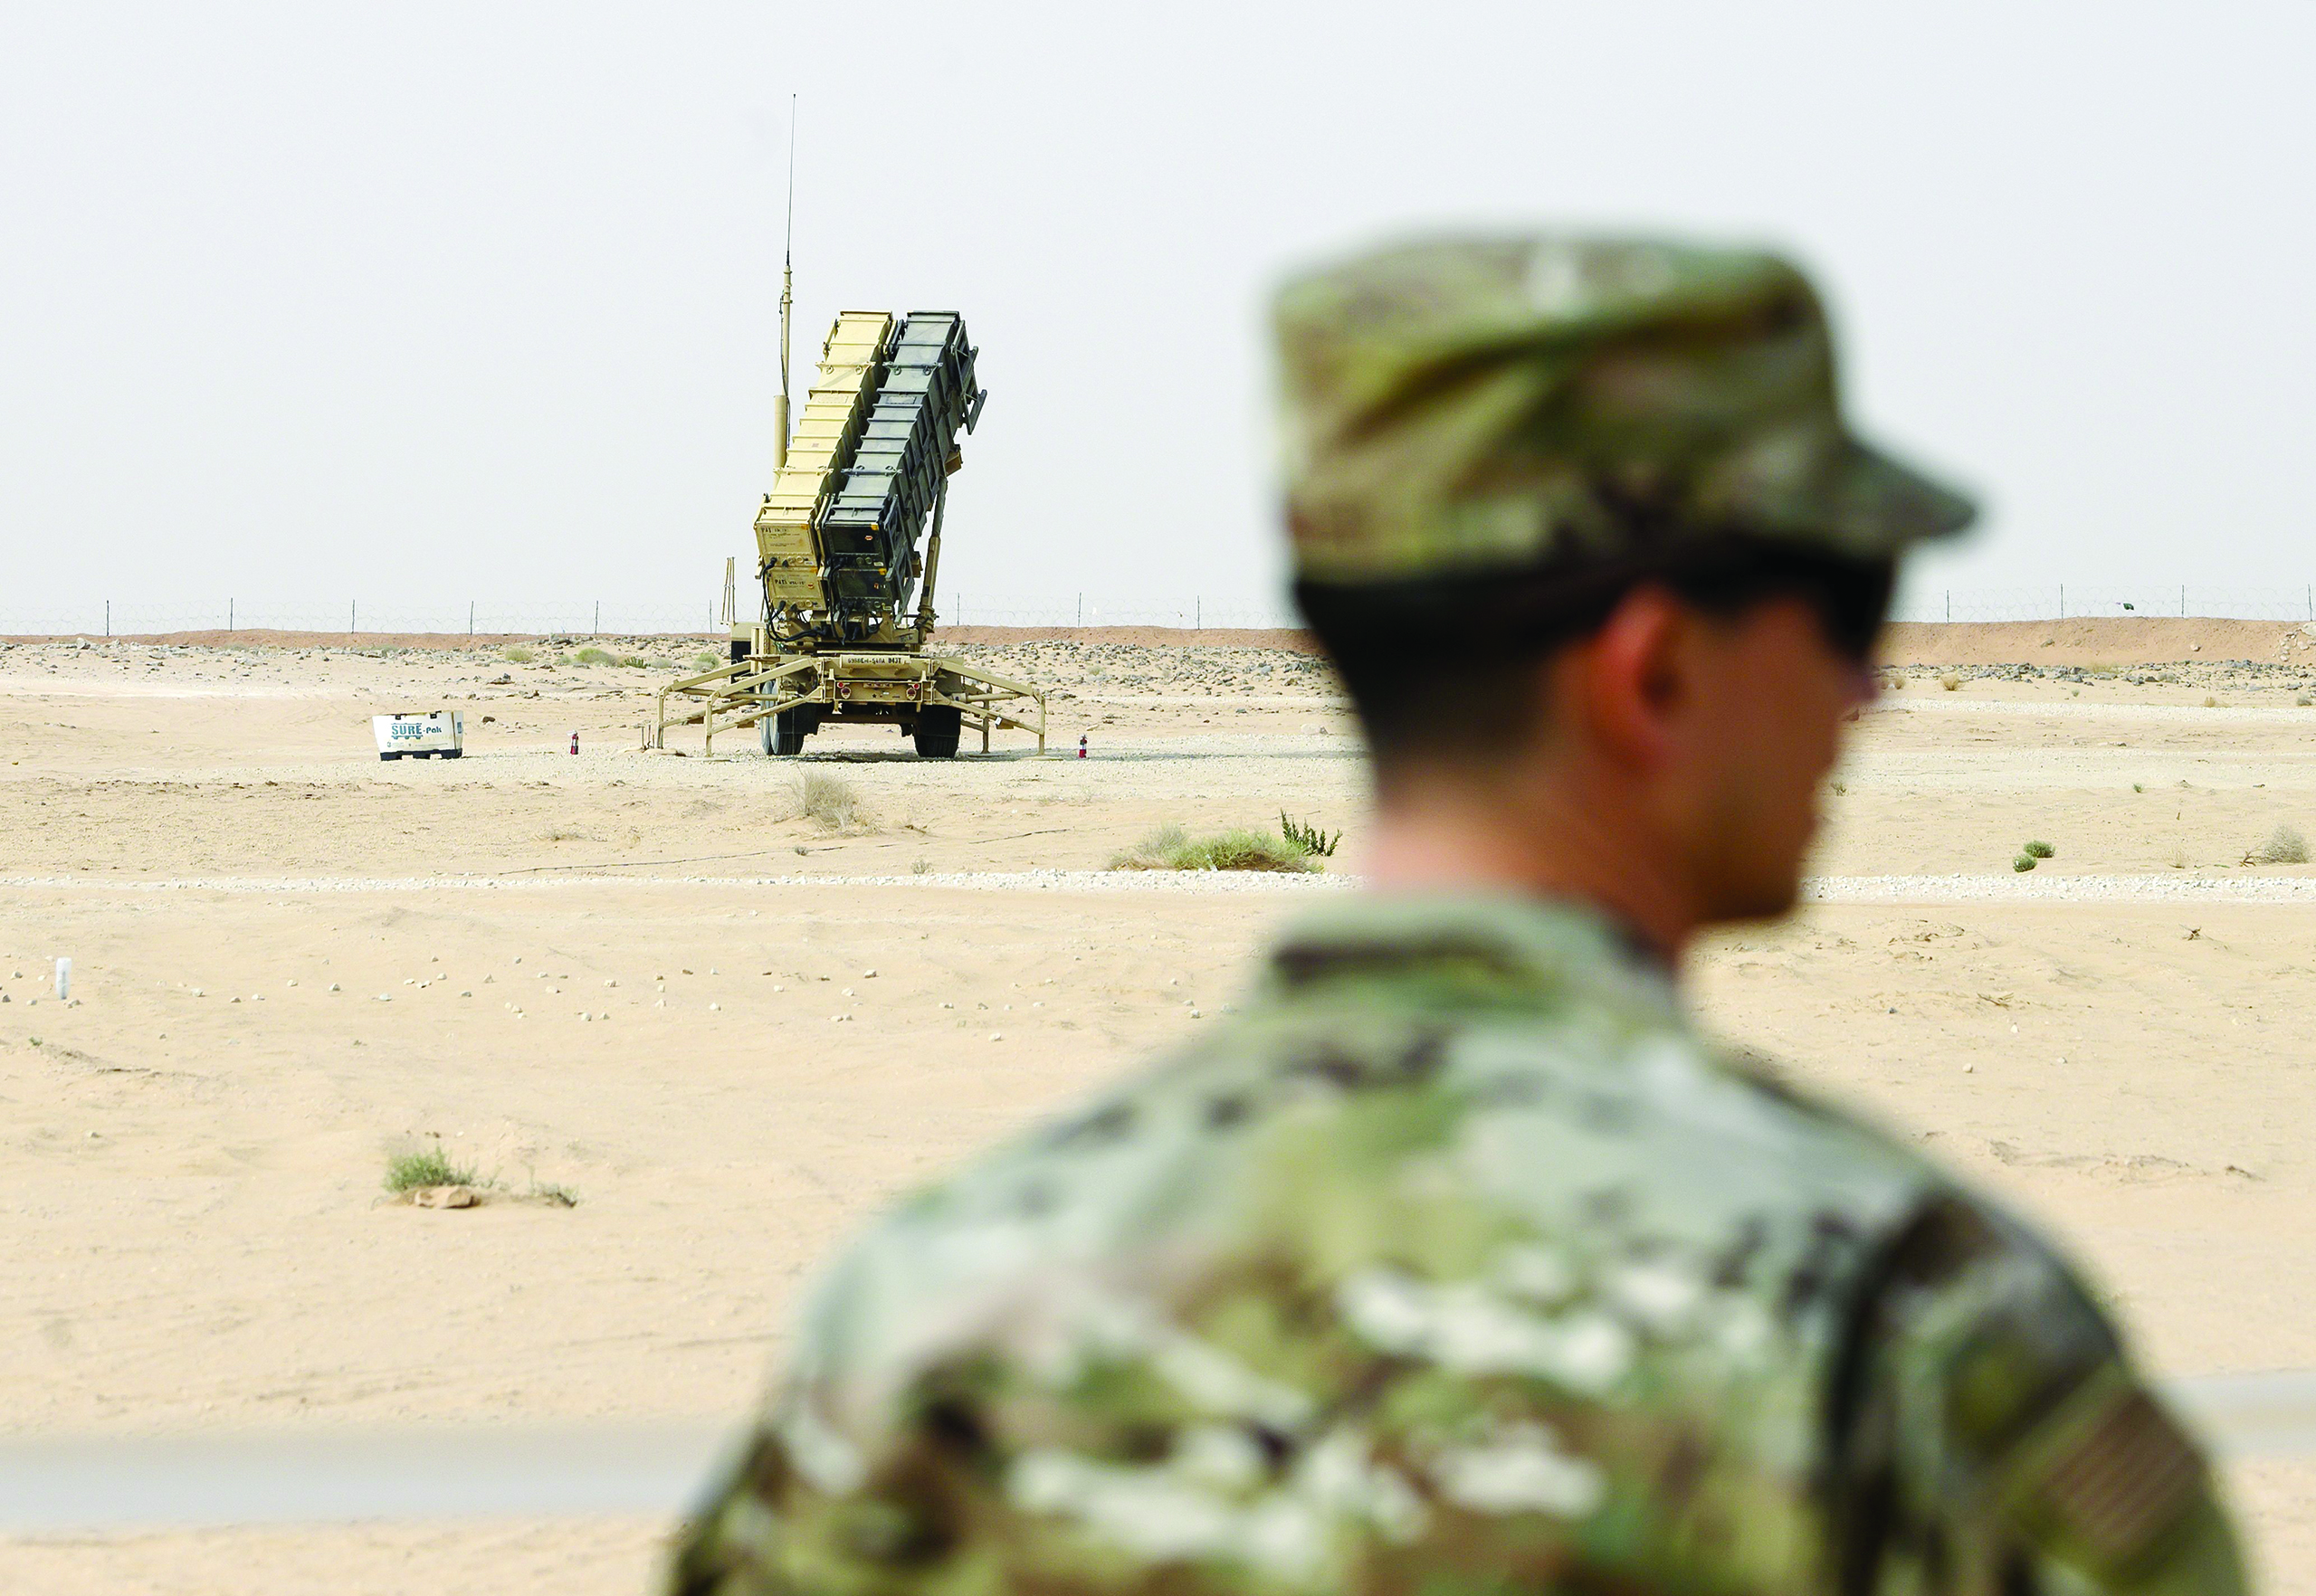 (FILES) In this file photo taken on February 20, 2020, a member of the US Airforce looks on near a Patriot missile battery at the Prince Sultan air base in Al-Kharj, in central Saudi Arabia. - Saudi air defences intercepted ballistic missiles over Riyadh and a city on the Yemen border late on March 28, leaving at least two civilians wounded in the capital that is under curfew in a bid to curb the spread of the coronavirus. Multiple explosions shook Riyadh in the attack, which the Saudi-led military coalition blamed on Yemen's Iran-aligned Huthi rebels. It was the first major assault on Saudi Arabia since the Huthis offered last September to halt attacks on the kingdom after devastating twin strikes on Saudi oil installations. (Photo by ANDREW CABALLERO-REYNOLDS / POOL / AFP)